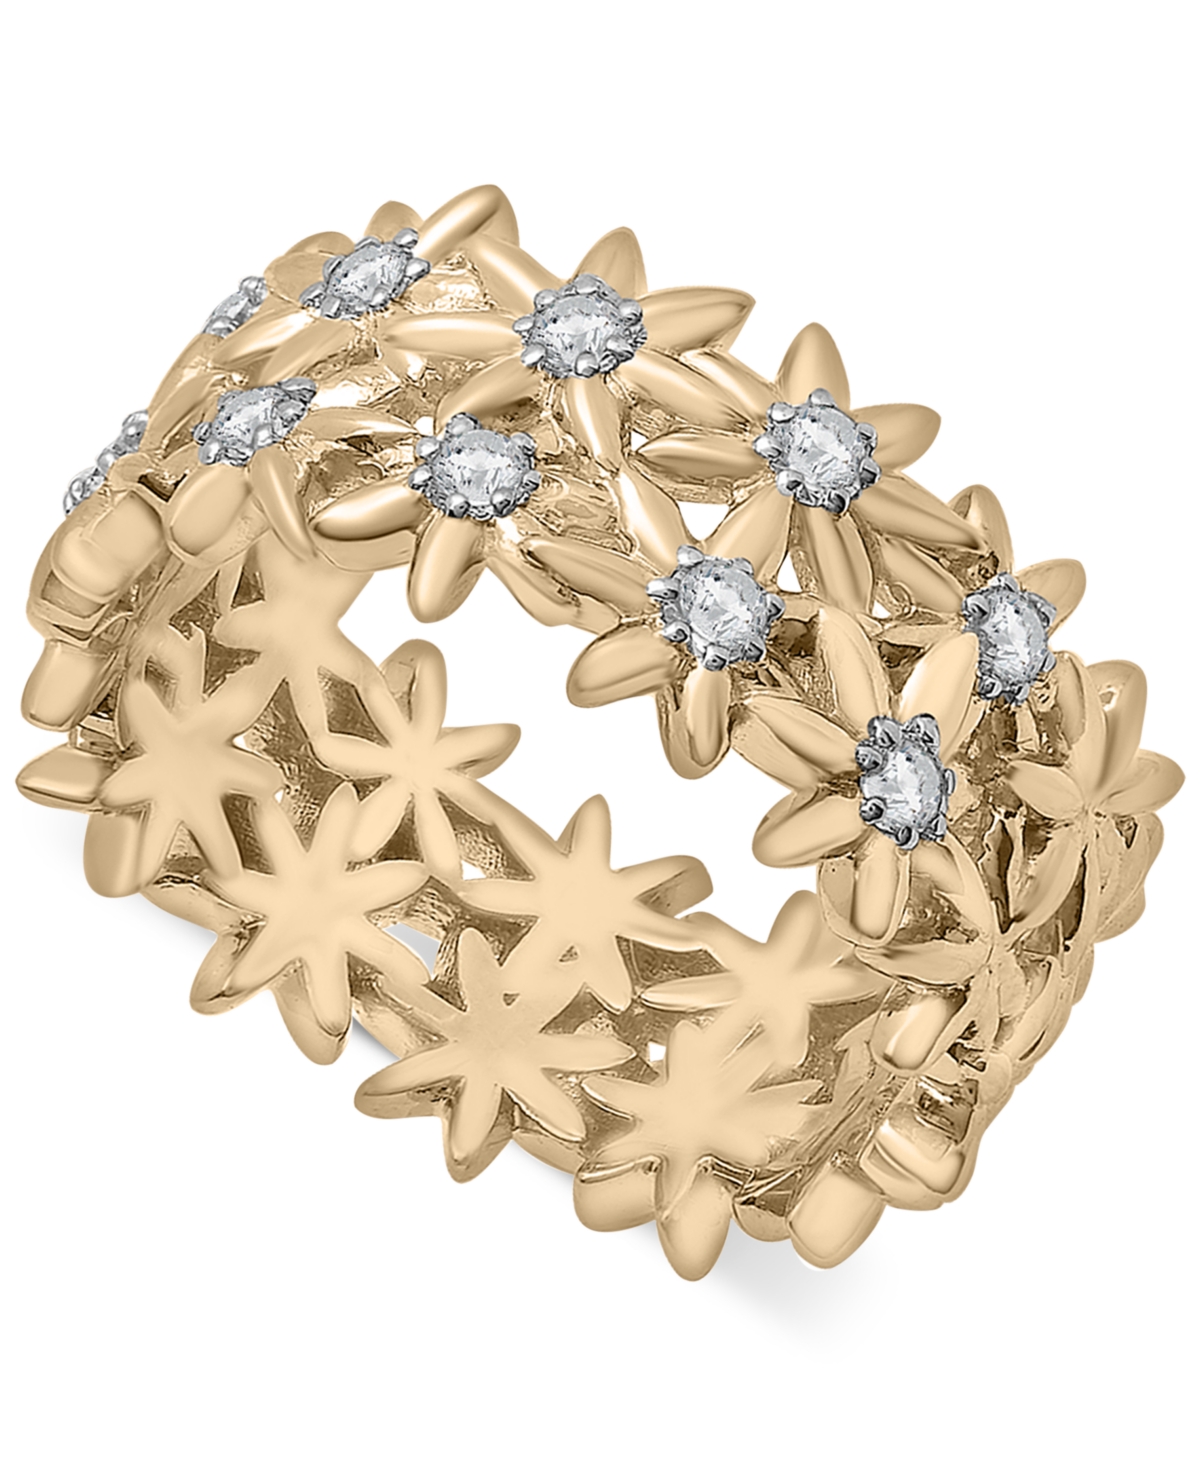 Diamond Flower Ring (1/3 ct. t.w.) in Gold Vermeil, Created for Macy's - Gold Vermeil